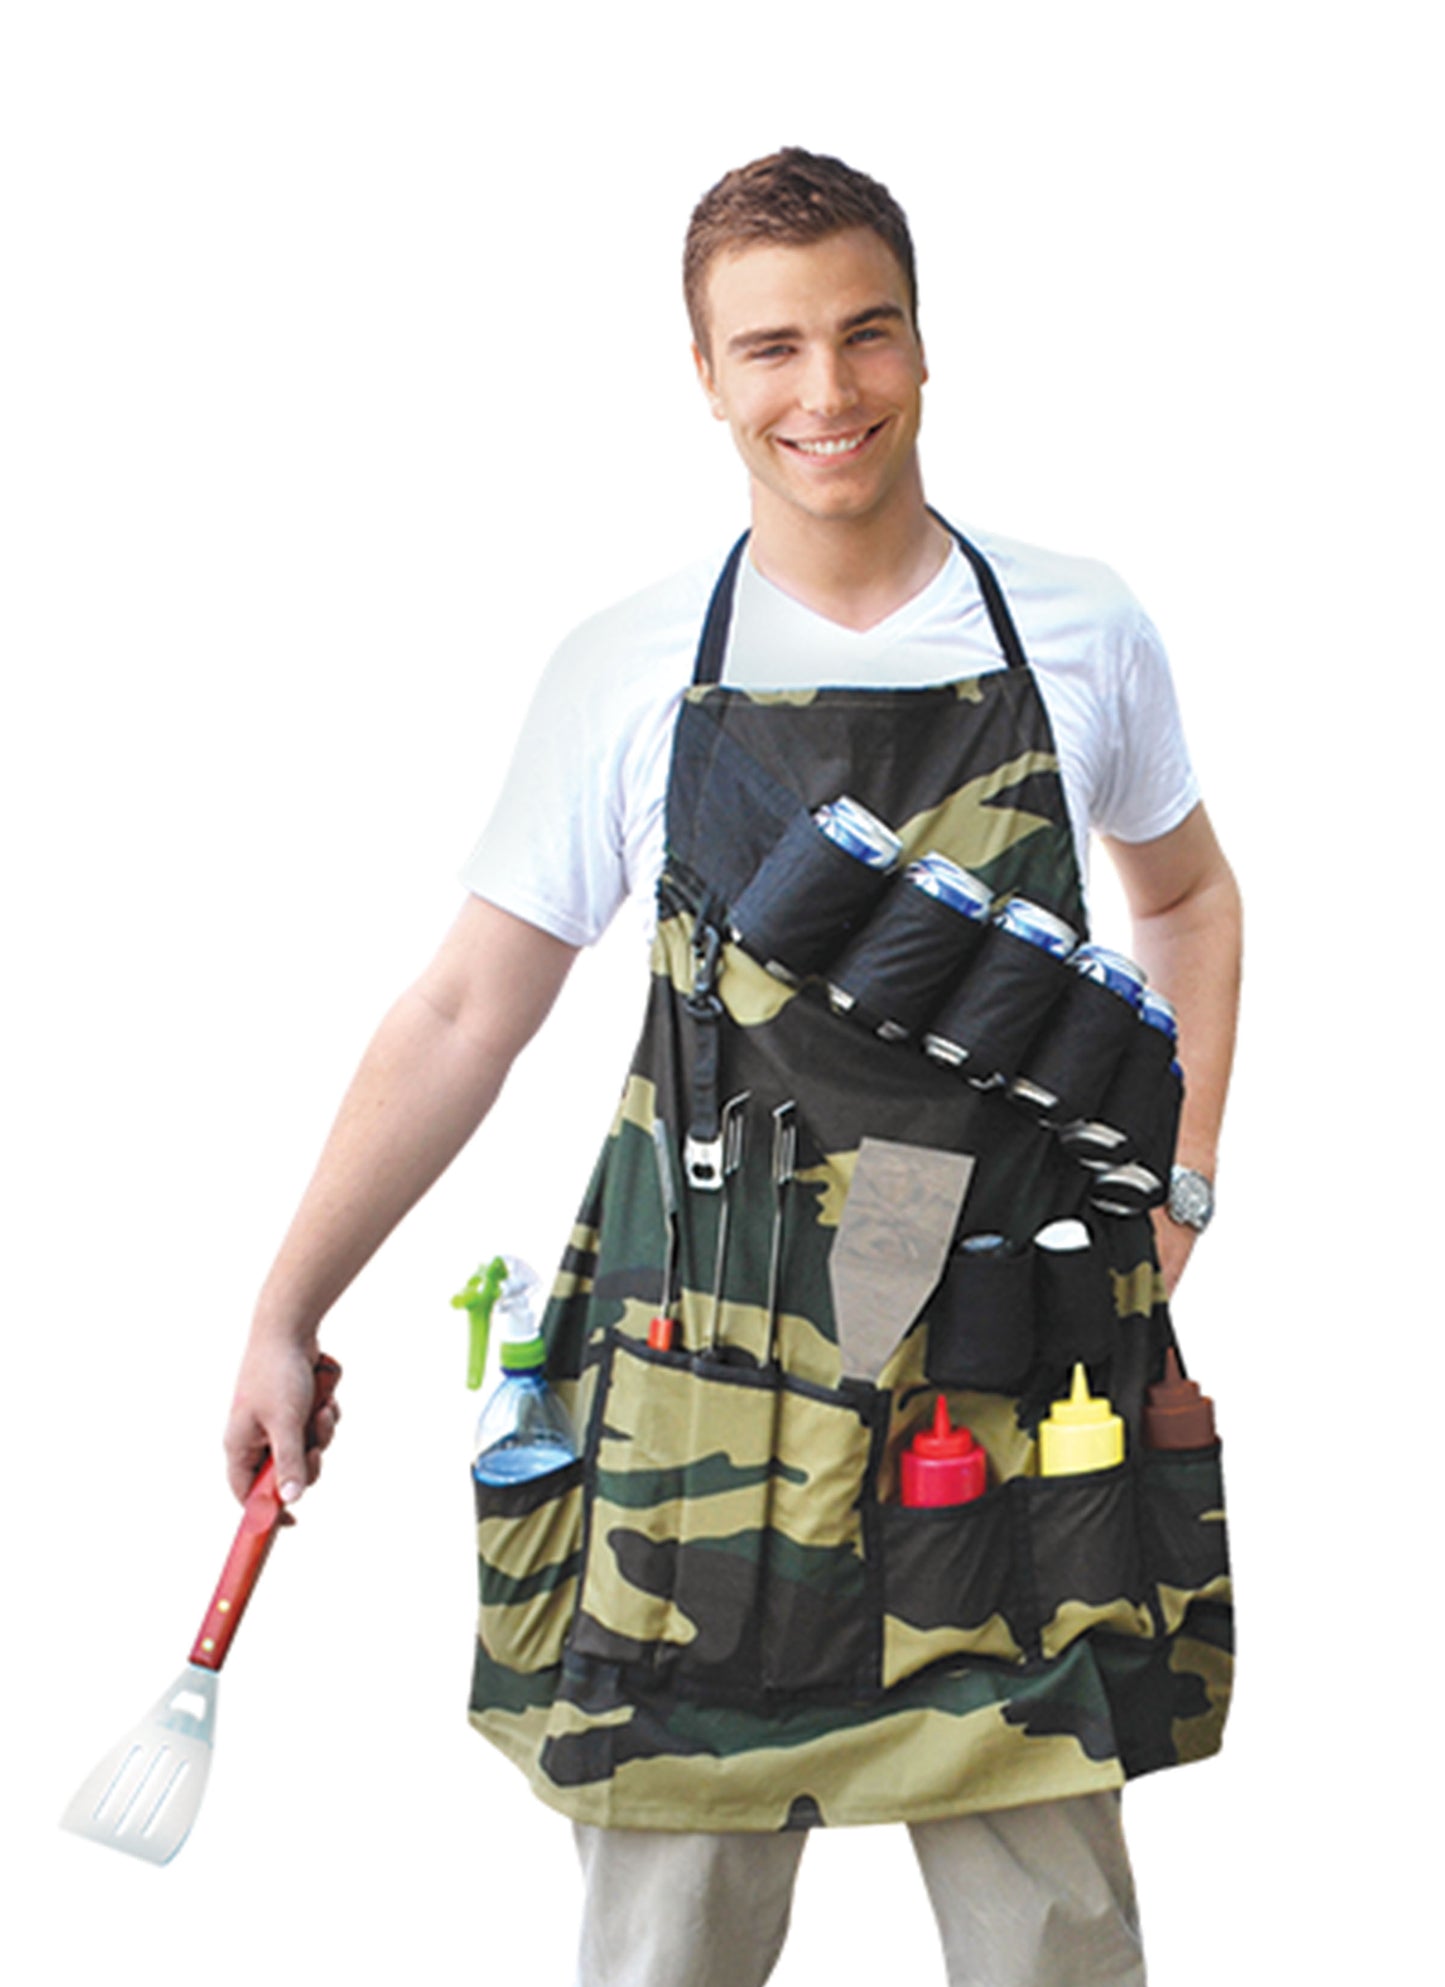 The Grill Sergeant Bbq Apron